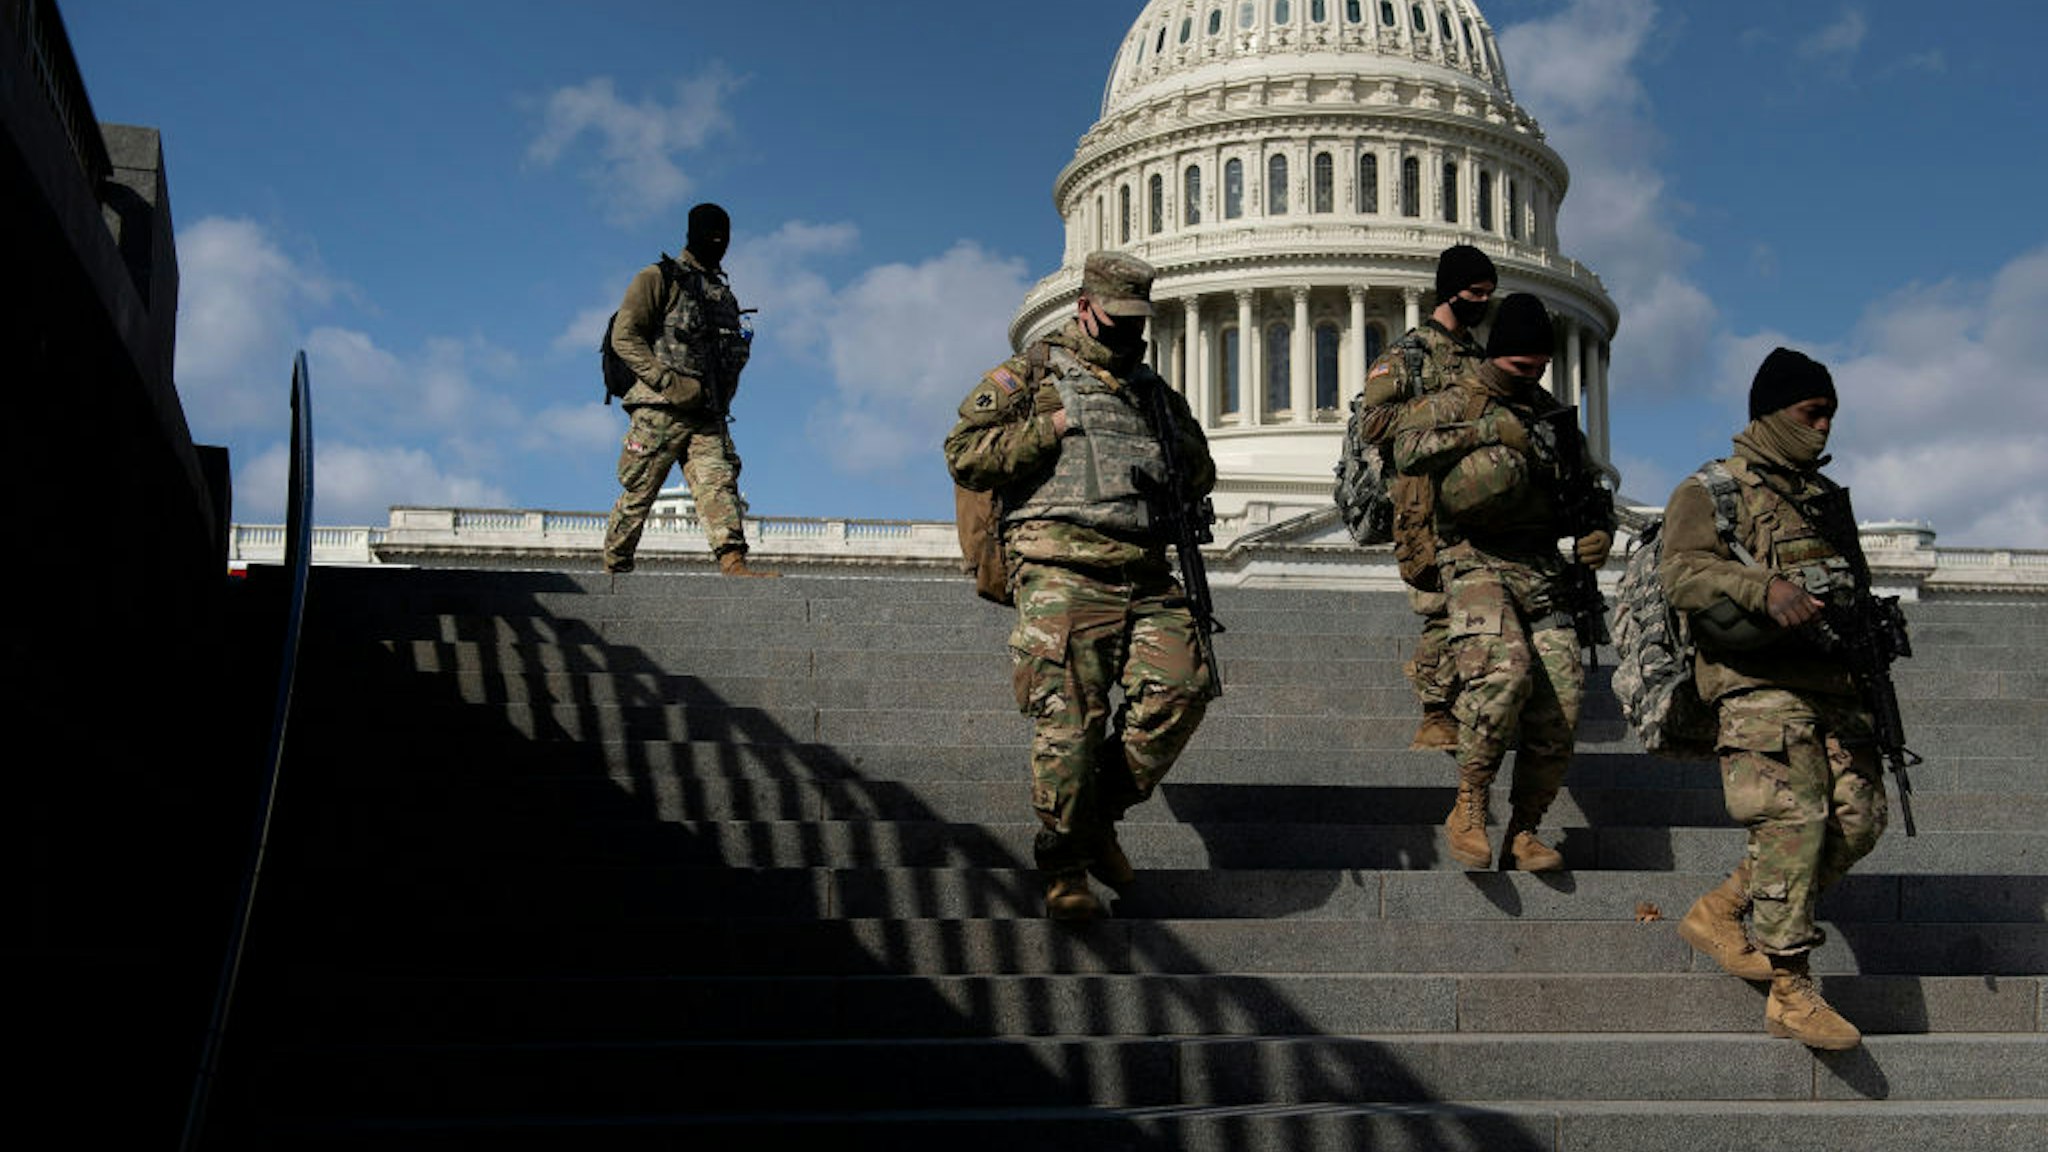 Members of the National Guard patrol the grounds of the US Capitol on March 4, 2021, in Washington, DC. - Lawmakers and staff were advised to stay away from the US Capitol after the FBI and Homeland Security Department warned that violent militia groups and QAnon followers had discussed attacking the legislature on or about March 4. The FBI-Homeland Security bulletin said extremists are still motivated by unfounded Republican claims of widespread voter fraud in the November presidential election won by Democrat Joe Biden. (Photo by Brendan Smialowski / AFP) (Photo by BRENDAN SMIALOWSKI/AFP via Getty Images)